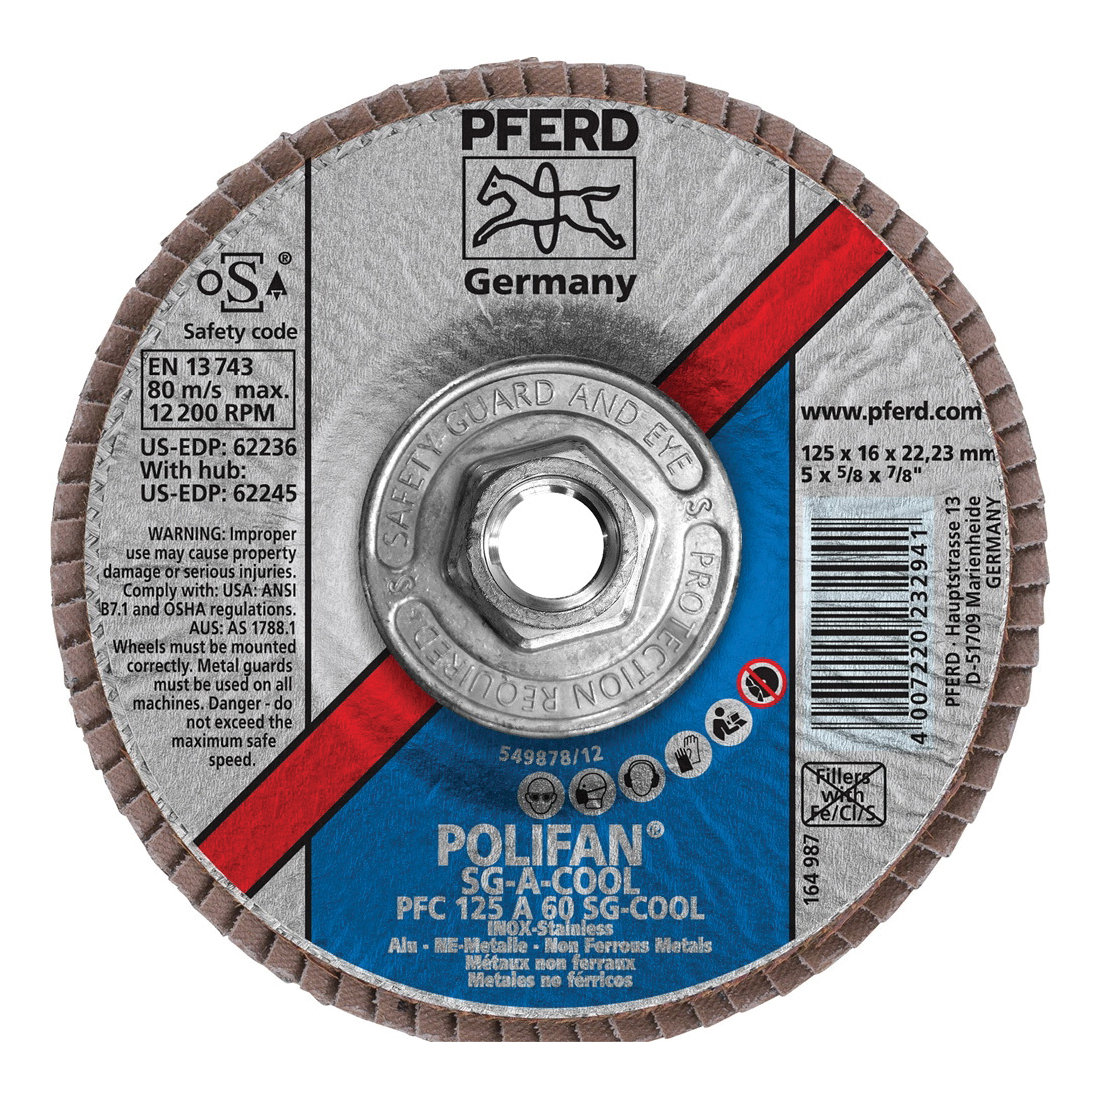 PFERD Polifan® 62245 Performance Line SG A-COOL Threaded Coated Abrasive Flap Disc, 5 in Dia, 60 Grit, Aluminum Oxide Abrasive, Type 29 Conical Disc